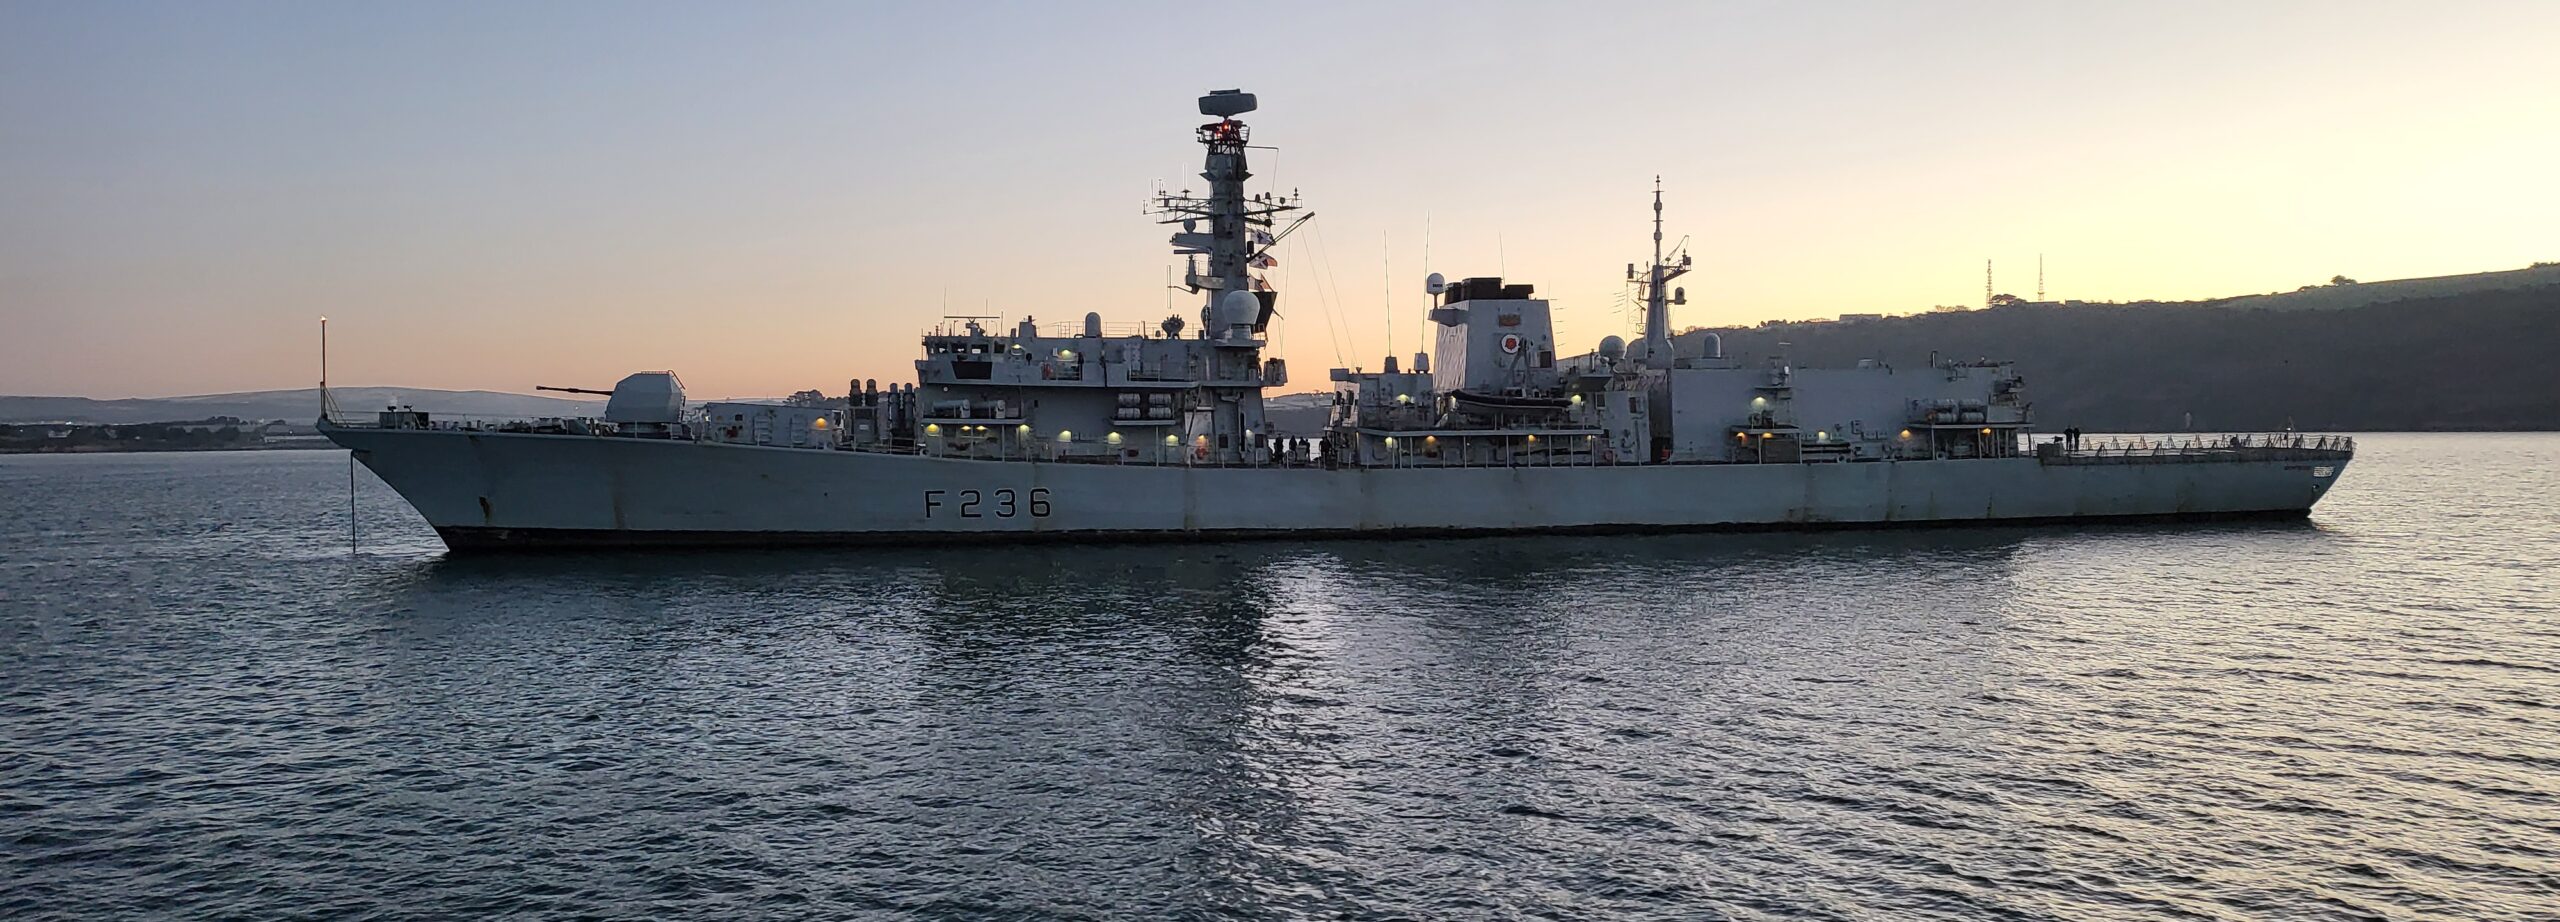 The UK Royal Navy (RN) Type 23 frigate HMS Montrose is pictured in Plymouth Sound in Decem-ber 2022, preparing to return to HM Naval Base Devonport following a three-year tour to the Gulf region that proved the RN’s forward-deployment concept. (Dr Lee Willett)